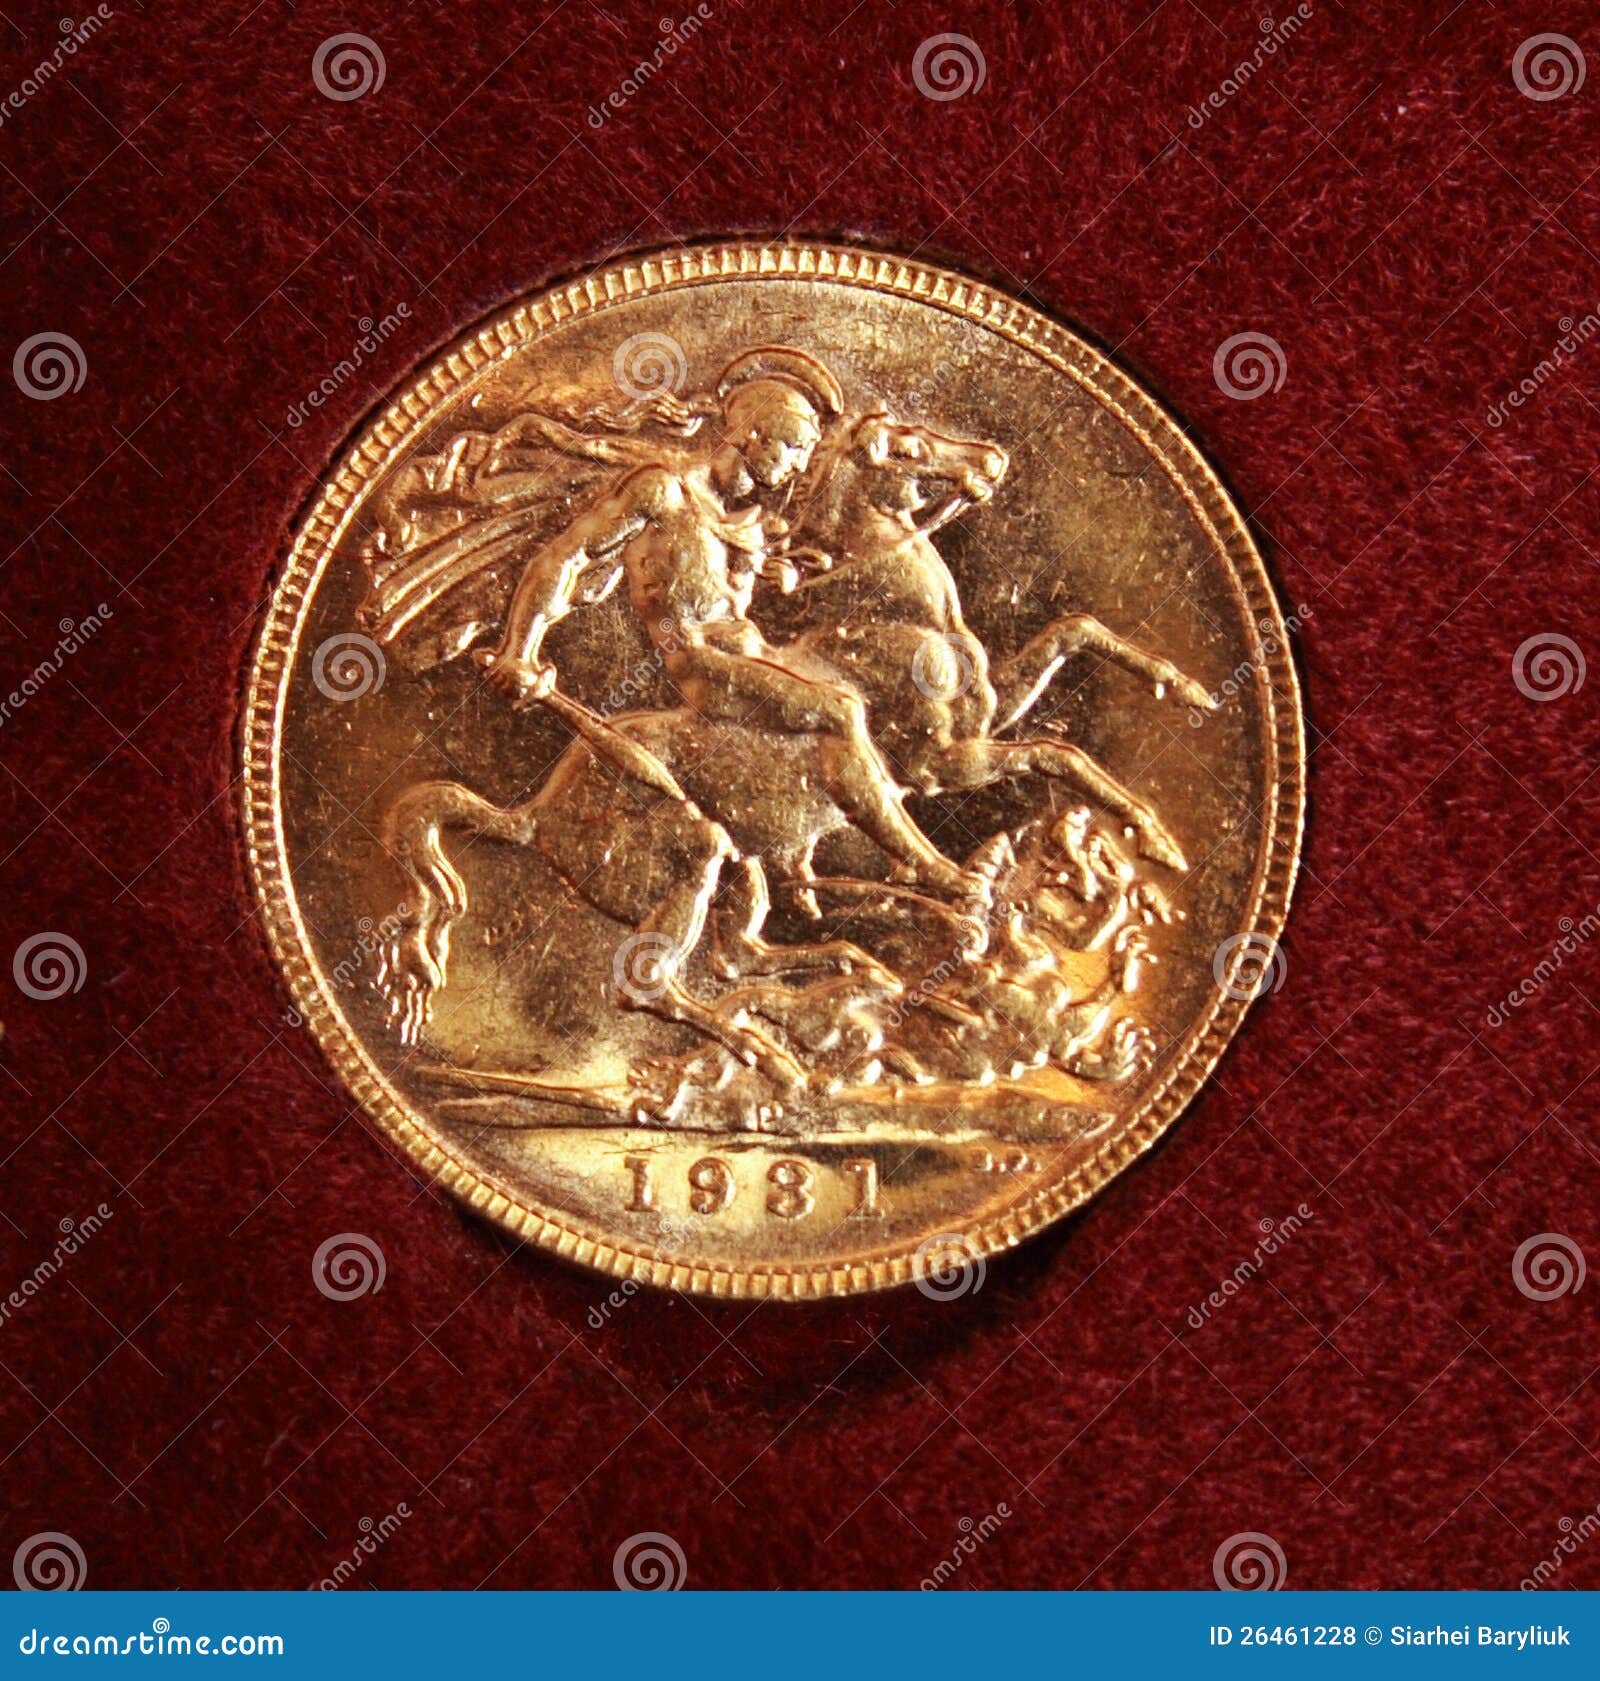 1931 gold sovereign on red background